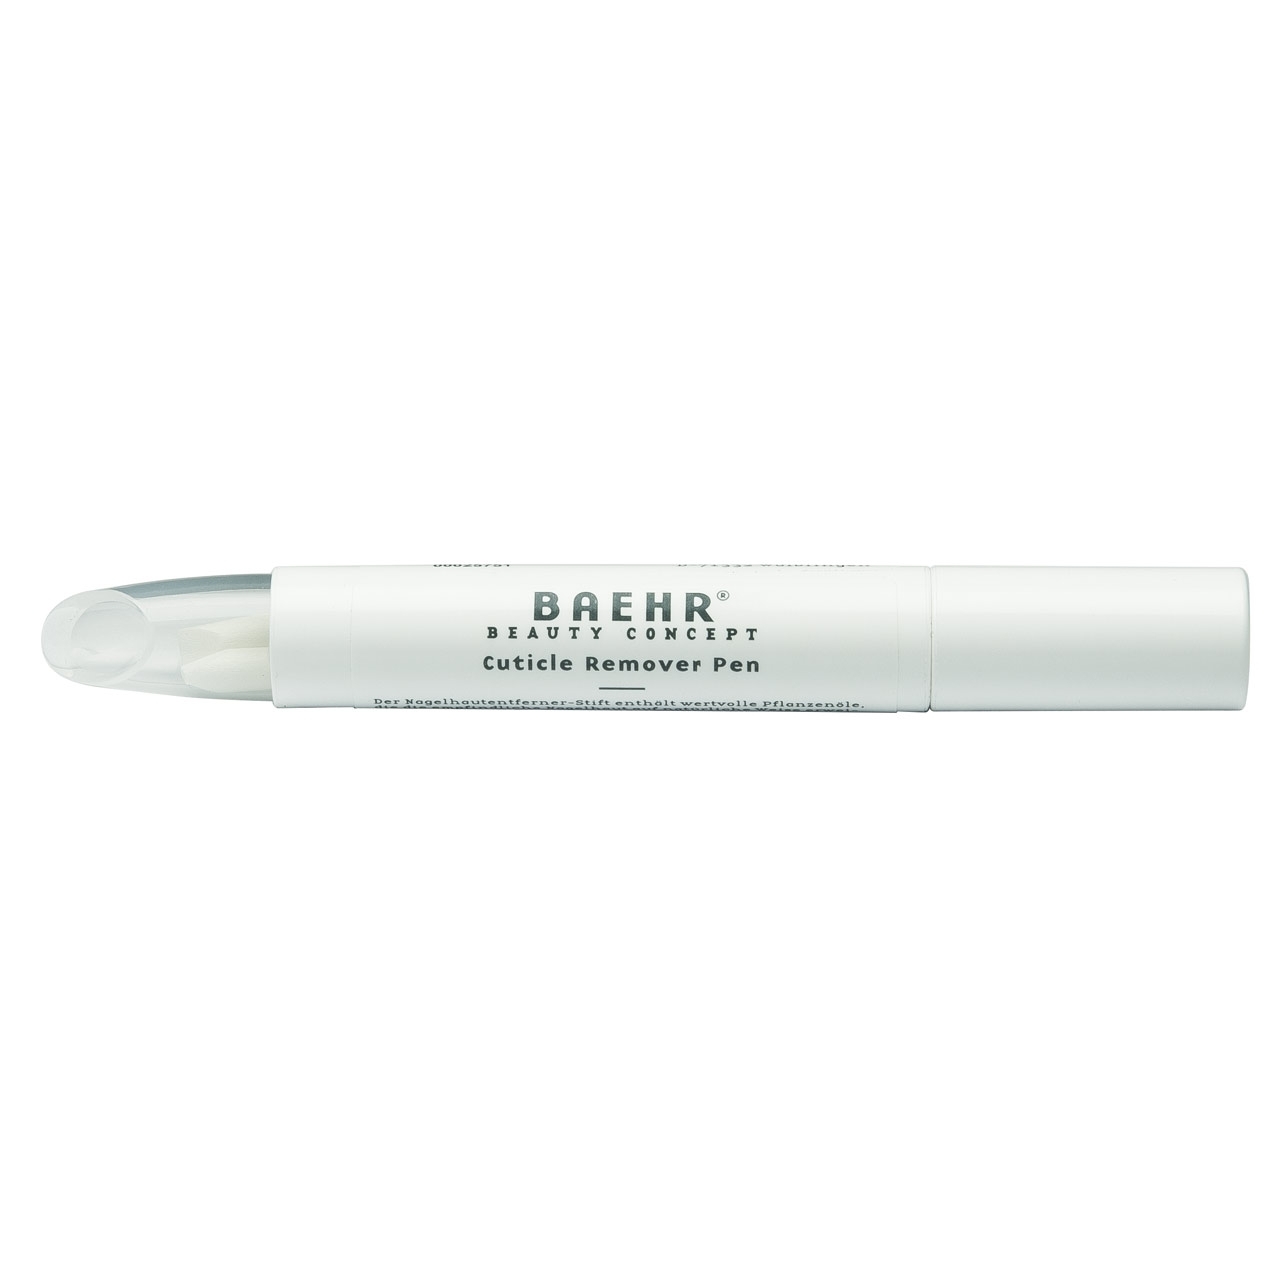 BAEHR BEAUTY CONCEPT - NAILS Cuticle Remover Pen 3 ml